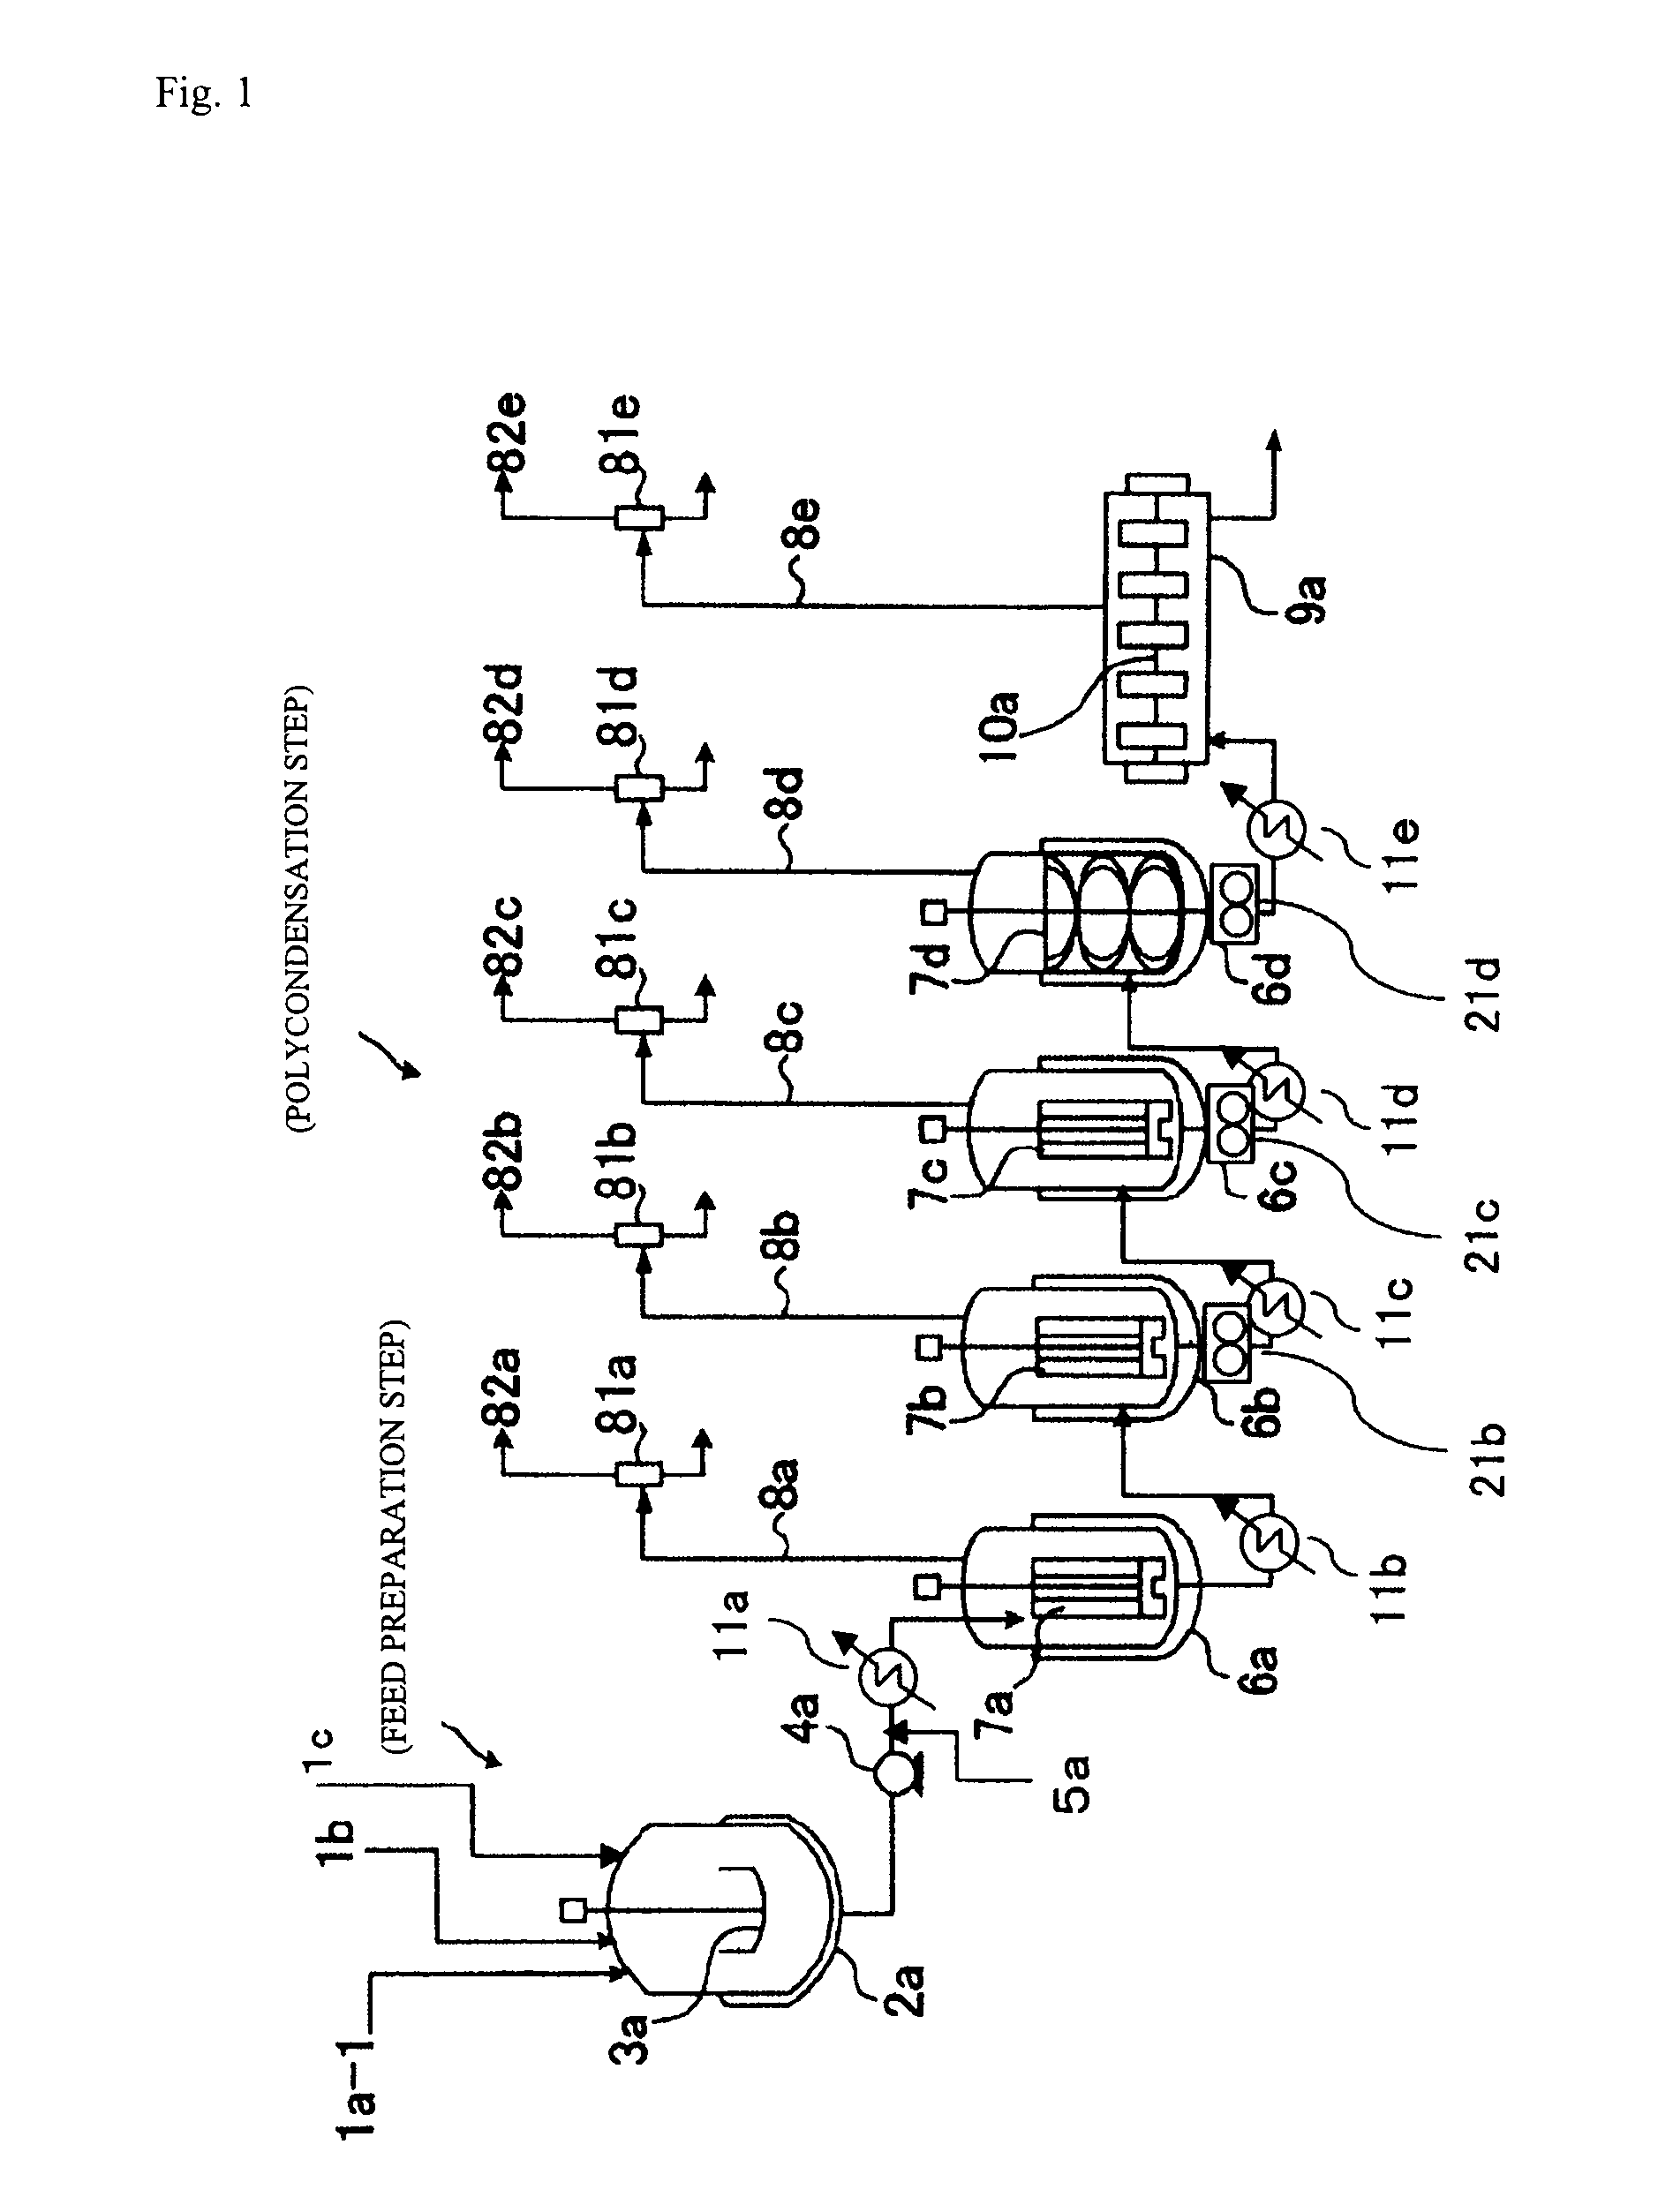 Processes for producing polycarbonate